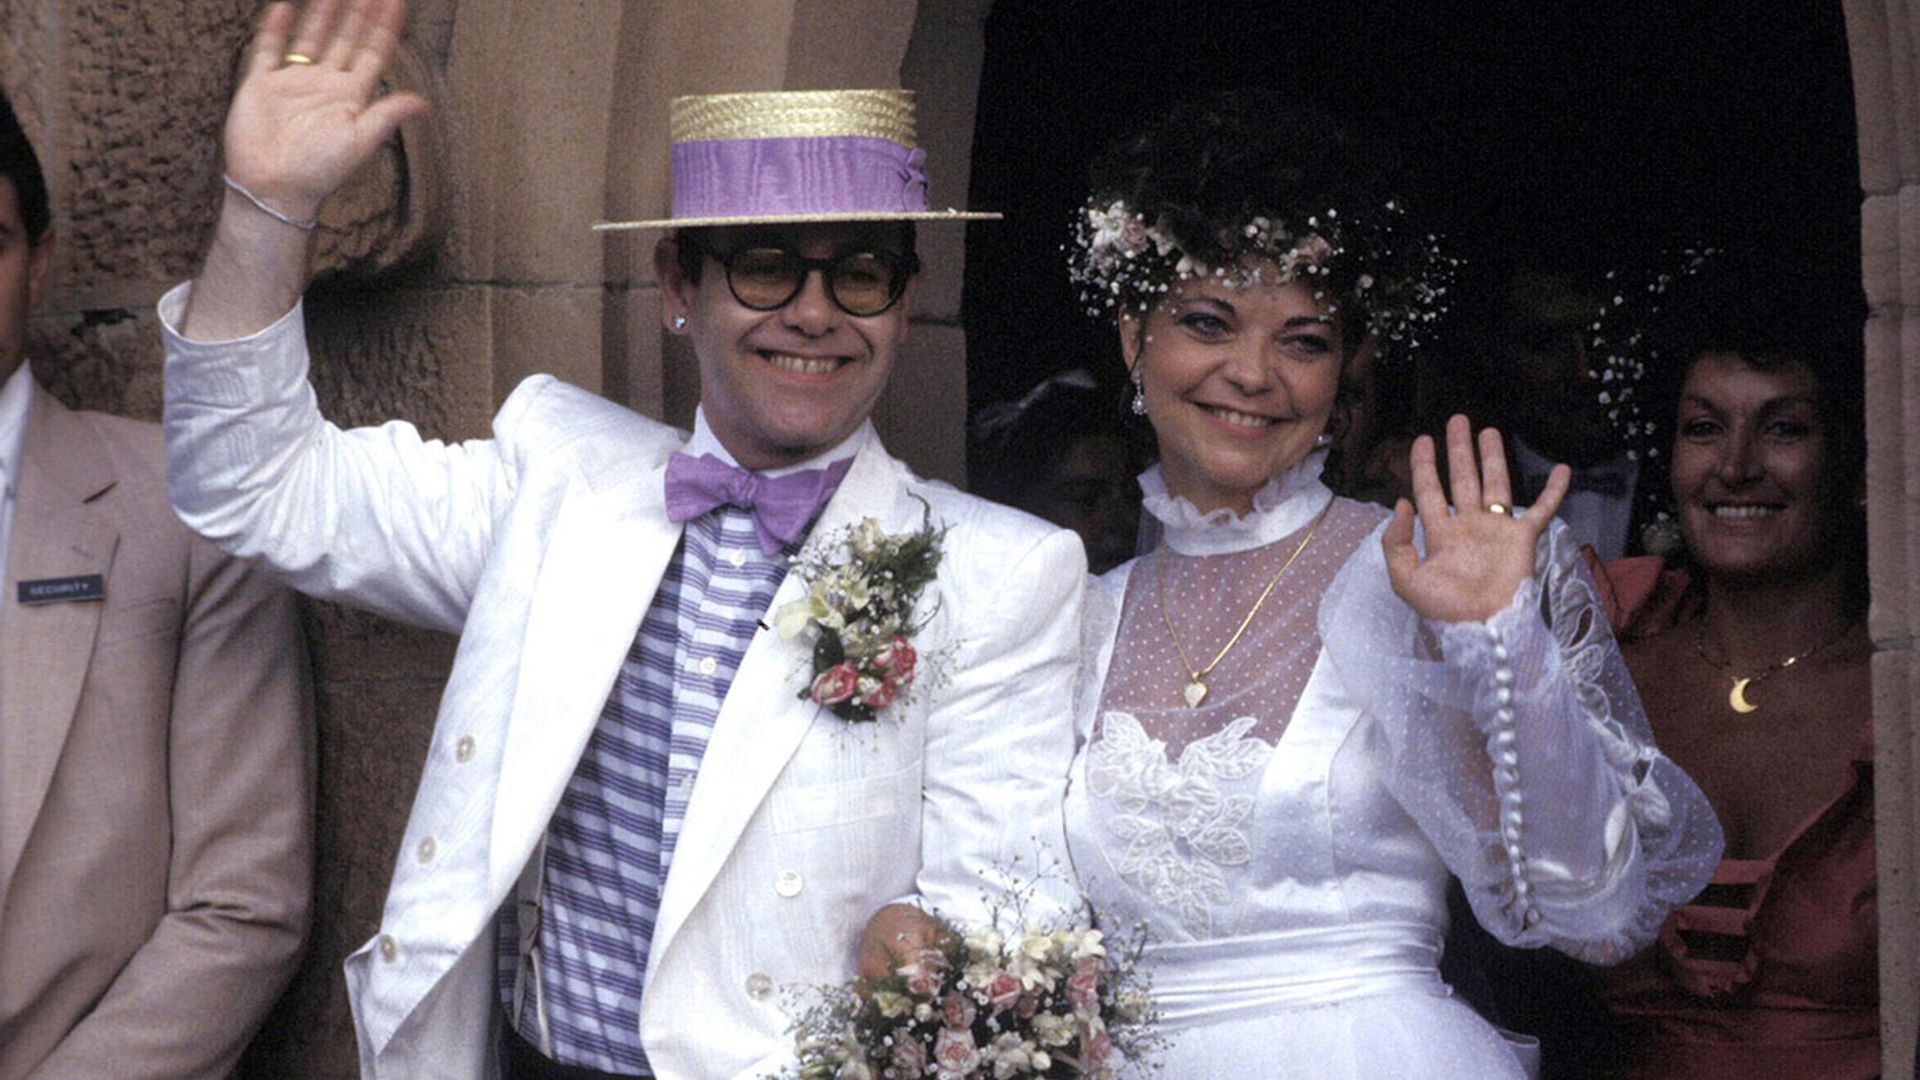 Elton John being sued for £3million by his ex-wife Renate Blauel: details